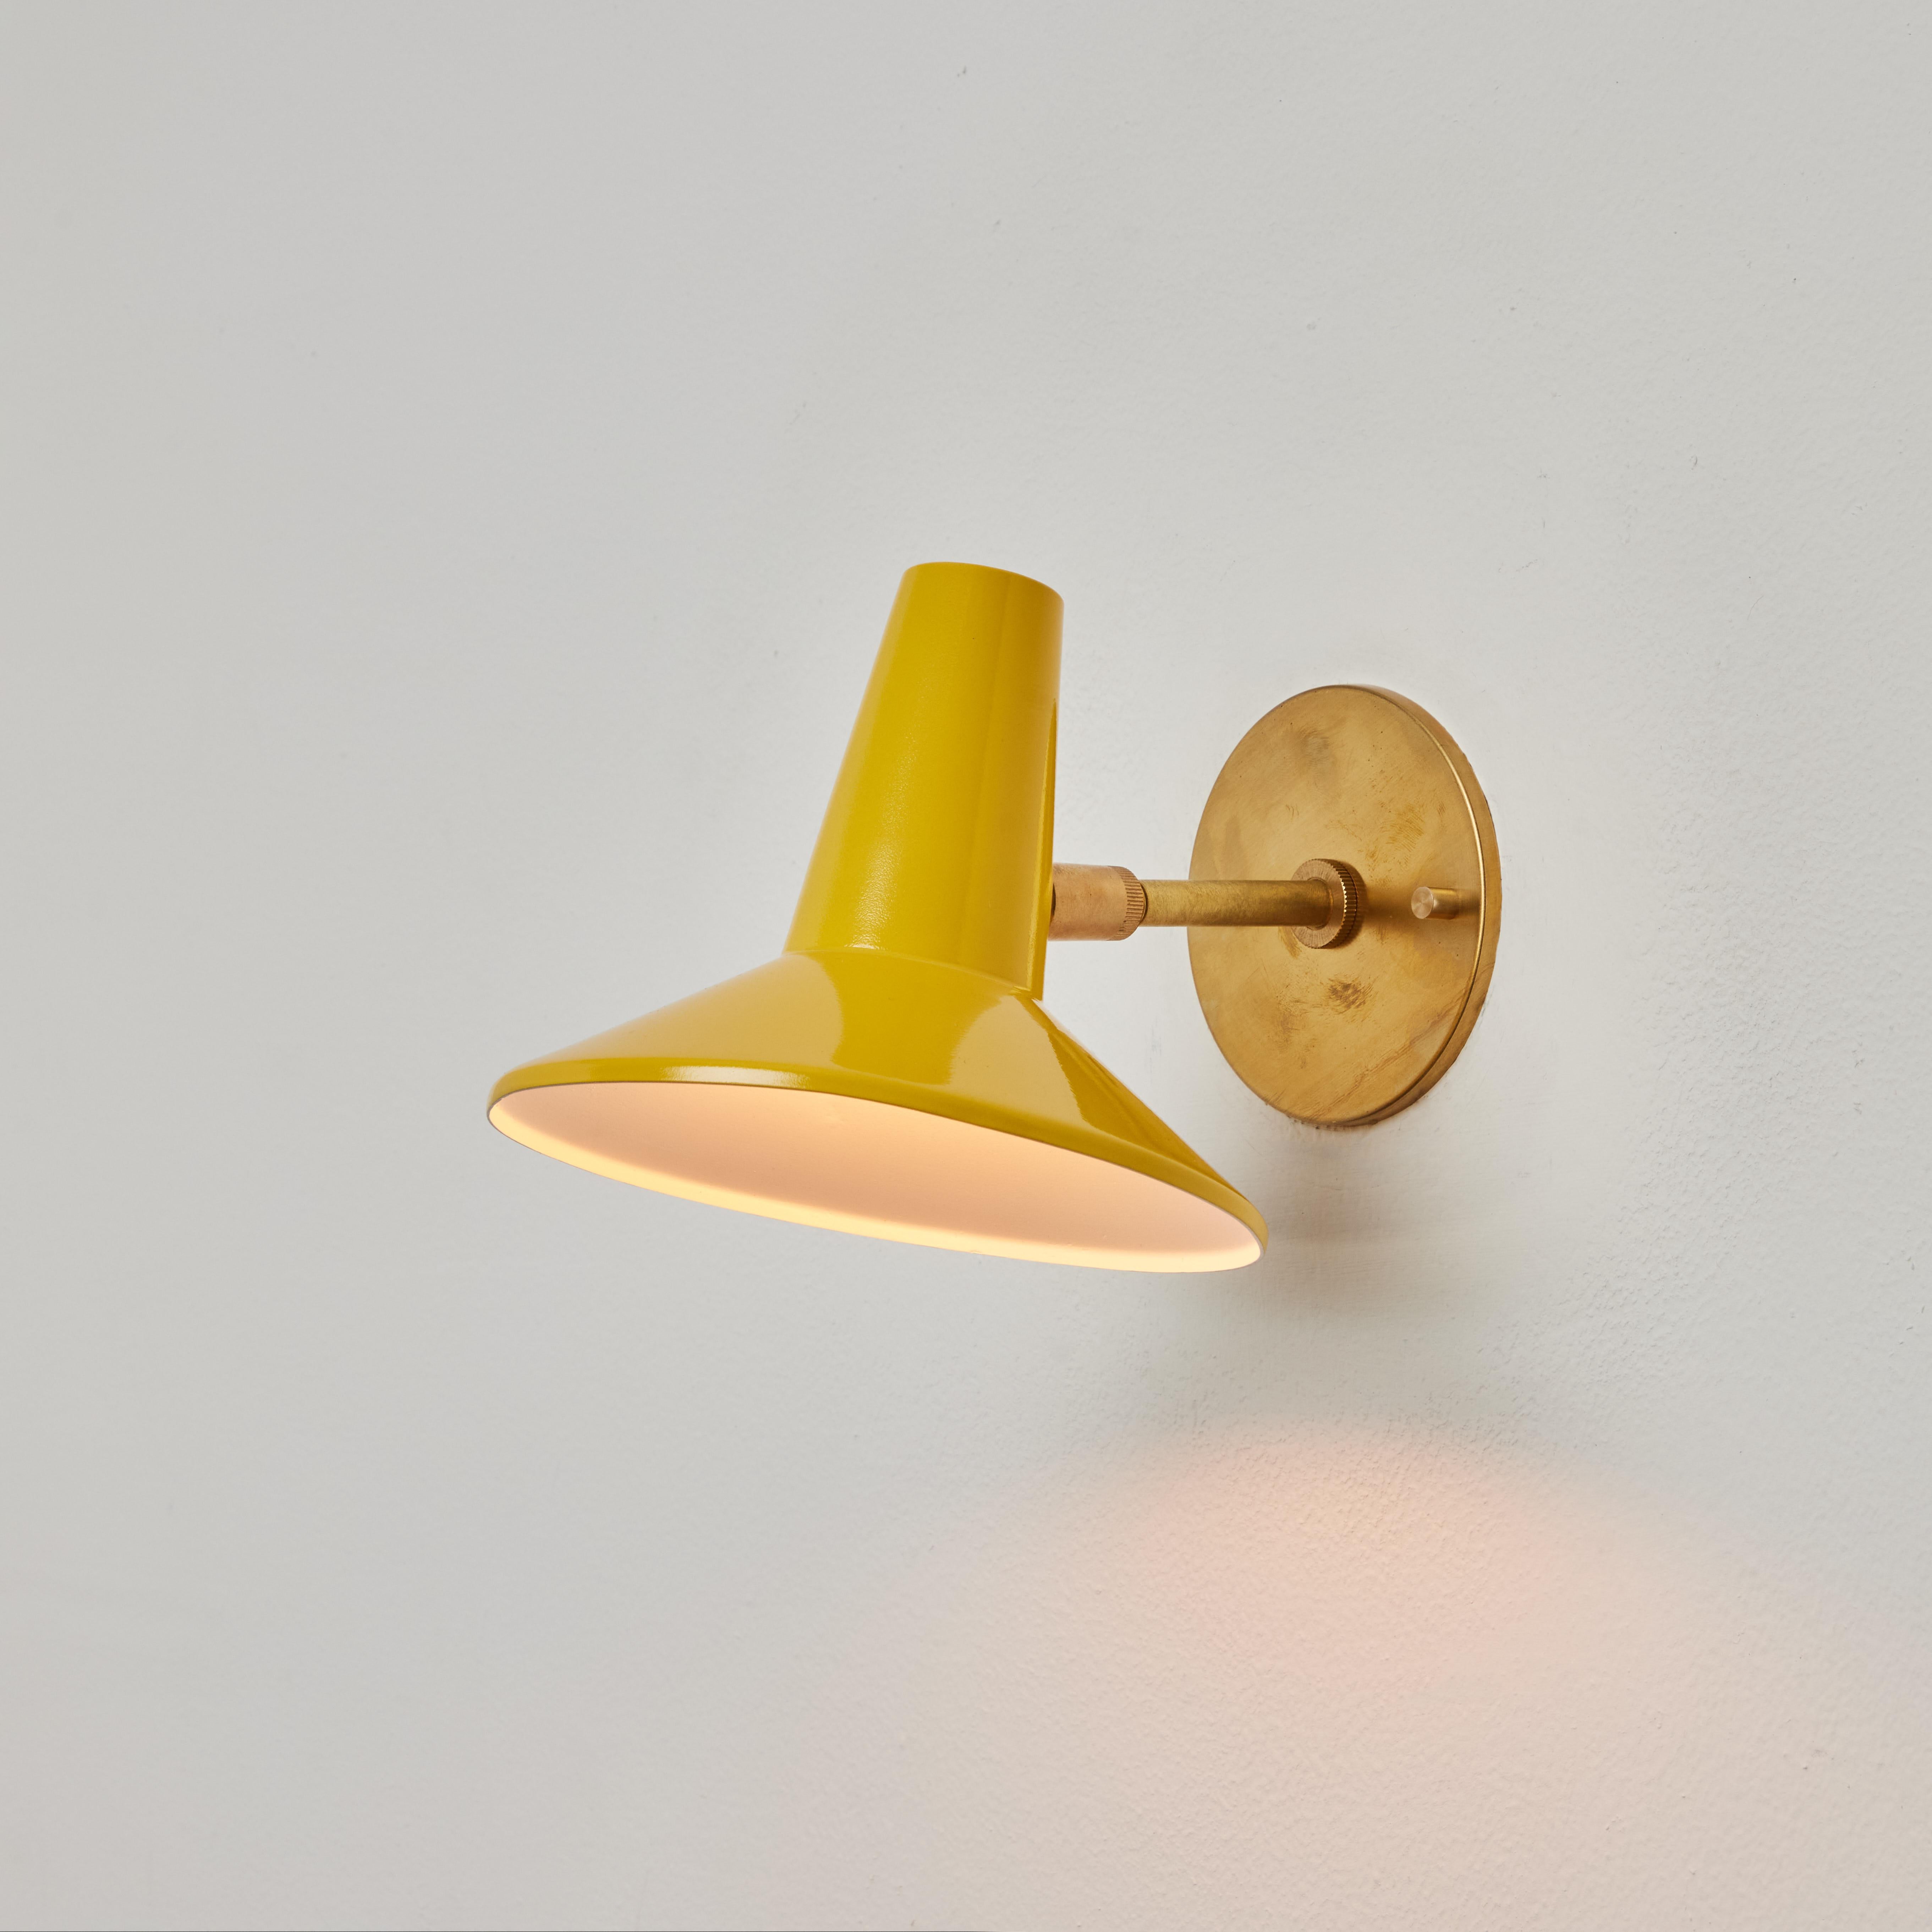 1950s Stilux Yellow Metal and Brass Articulating Sconce. Executed in brass and yellow painted aluminum. This highly adjustable wall lamp pivots up/down and left/right on a double ball joint. 

Stilux was one of the most innovative lighting design